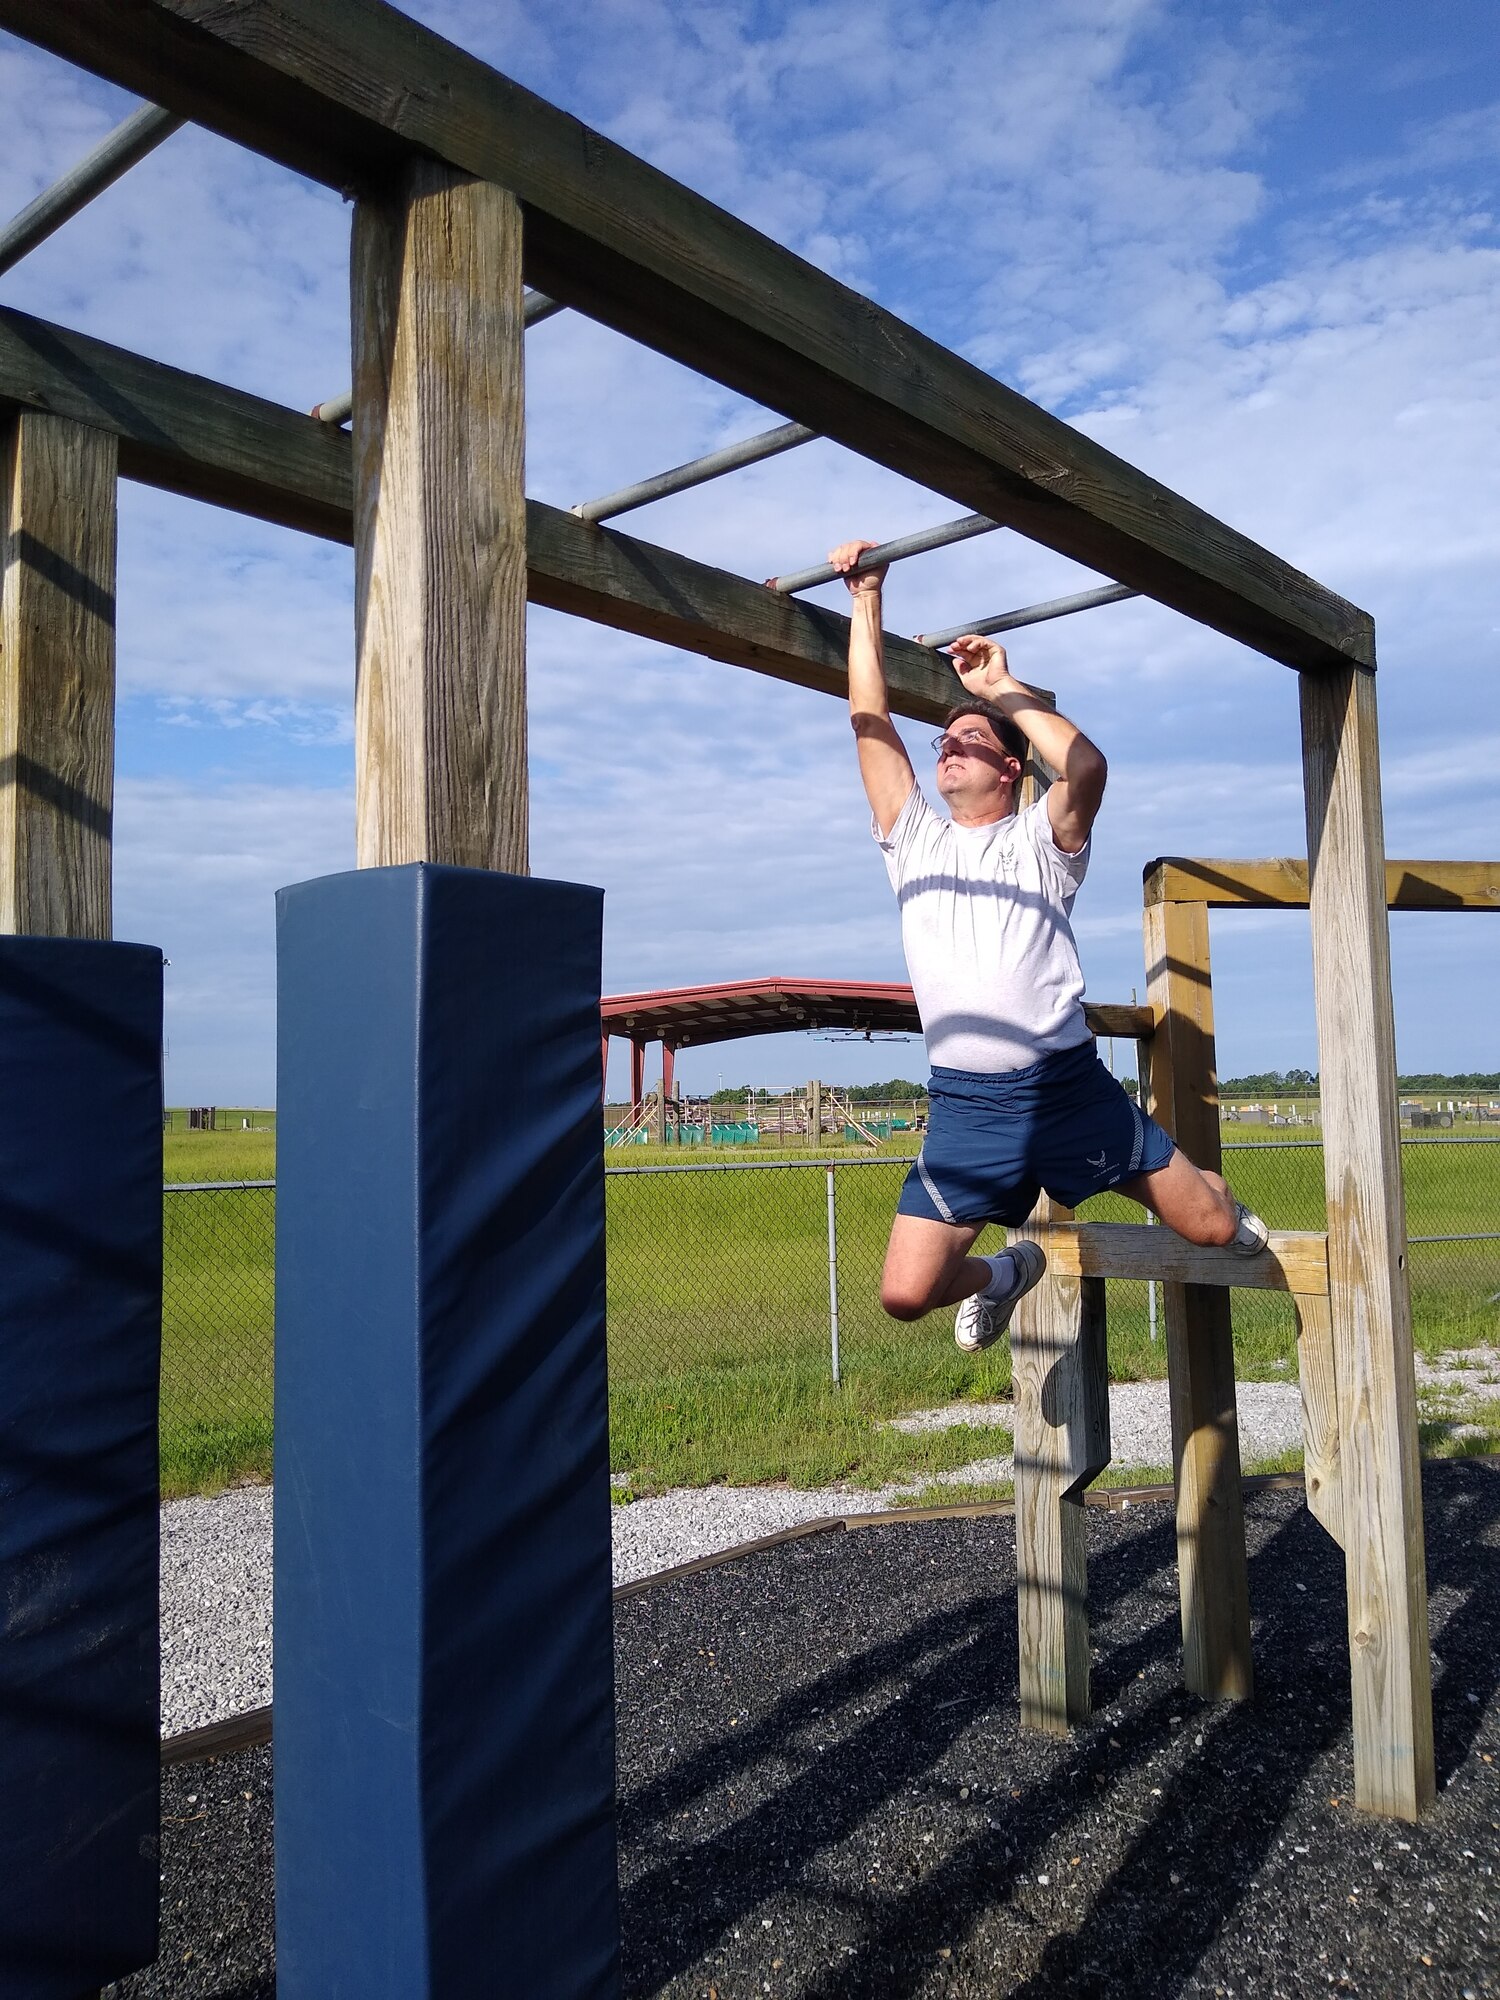 Senior Master Sgt. John Moon, 908th Airlift Wing, 25th Aerial Port Squadron, swings across an obstacle at the U.S. Air Force Officer Training School’s “Project X” on Maxwell Air Force Base, Ala., July 10. The event was a team-building and morale-boosting exercise which challenged participants’ problem-solving skills as well as physical fitness. (U.S. Air Force photo by Chief Master Sgt. Tracey Piel)